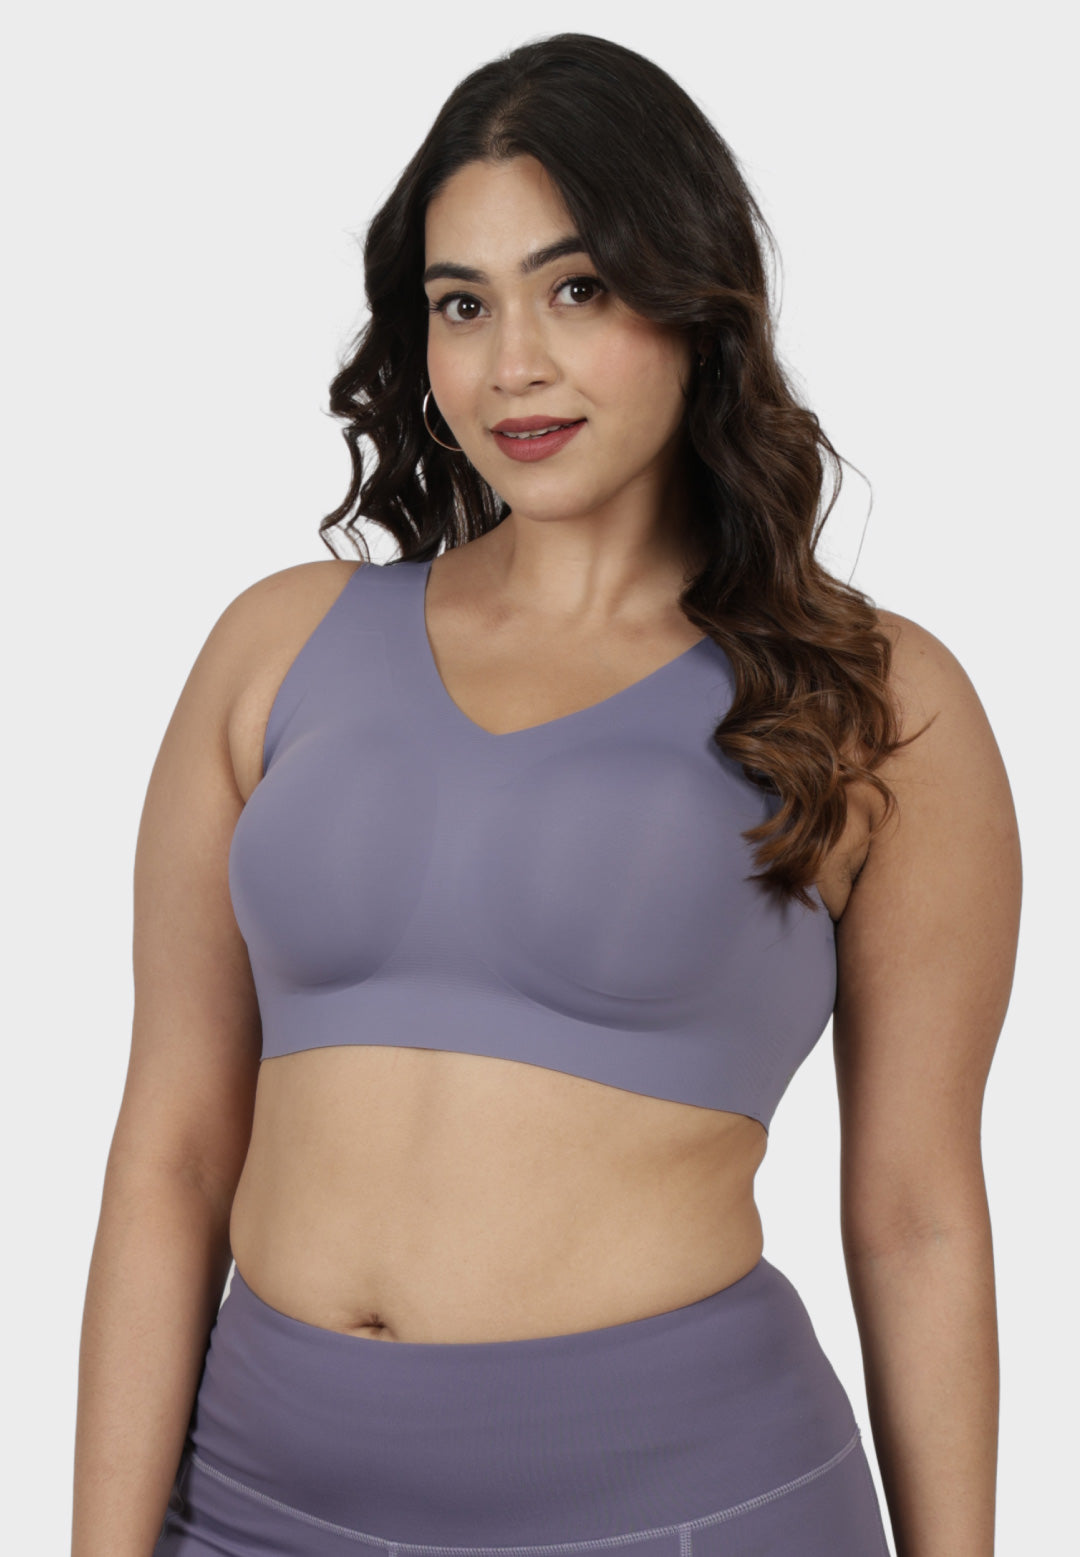 Rinpoche Sports Bras for Women Removable Padded Workout Yoga Gym Tank Tops  - 1 pc Women Sports Lightly Padded Bra - Buy Rinpoche Sports Bras for Women Removable  Padded Workout Yoga Gym